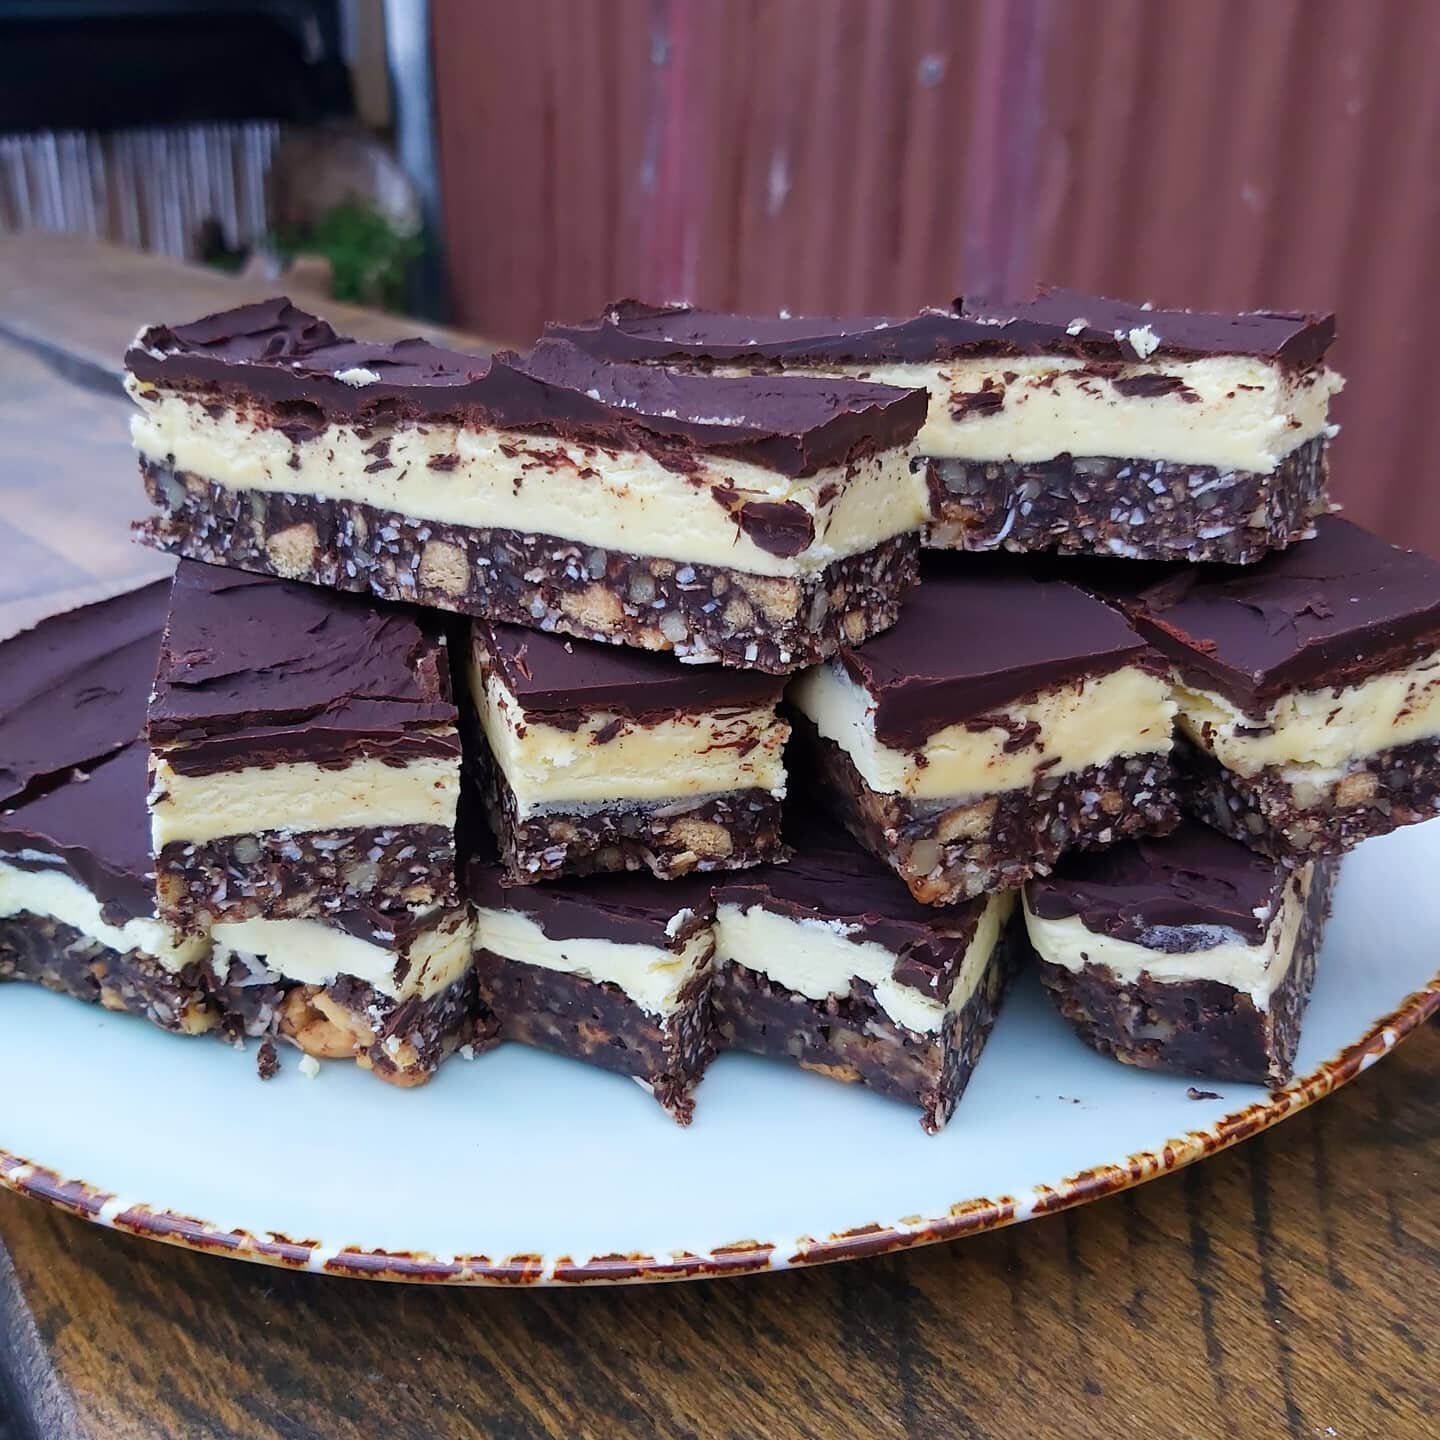 It's that time of the year!
Canada Day on July 1st
I'm taking orders now for Nanaimo Bar Slabs uncut. $30 for regular or $35 for gluten free. Pick up from the Cafe on June 30th.
Email me if you'd like one
coolsvillecartel@gmail.com 

❤ Lindsay 🇨🇦

